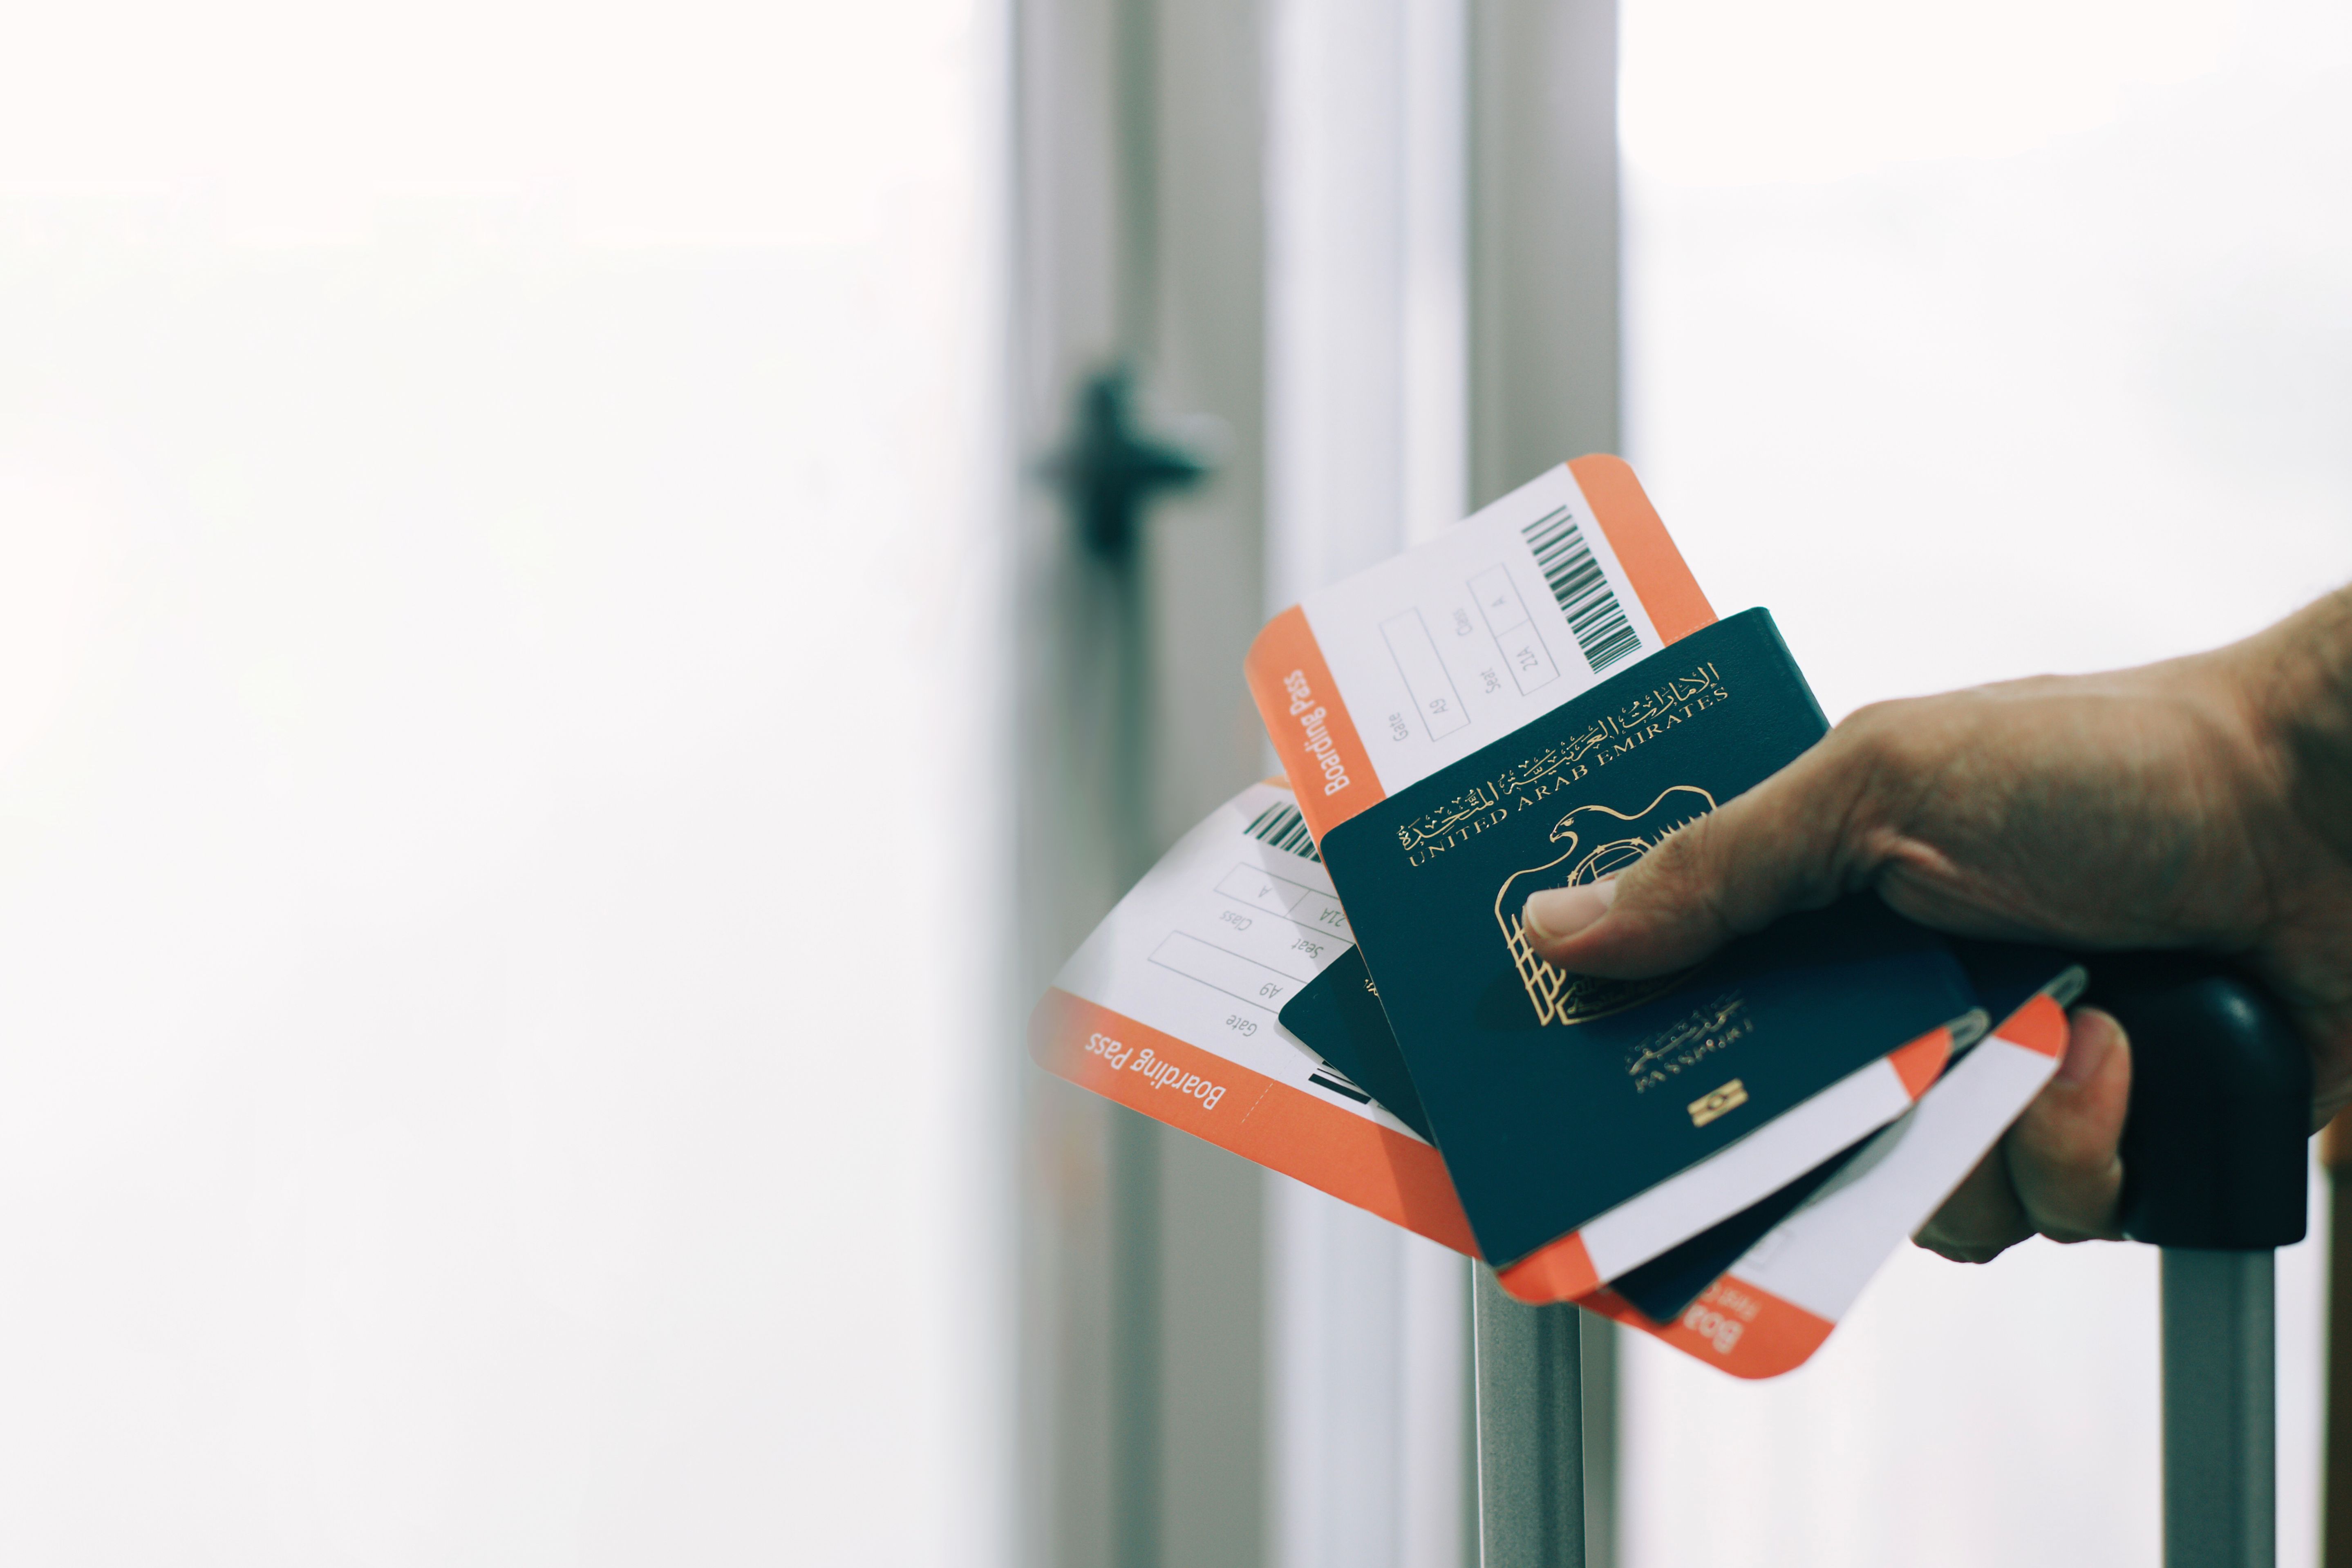 passenger holding uae passports and airline tickets in airport - departures pass gate